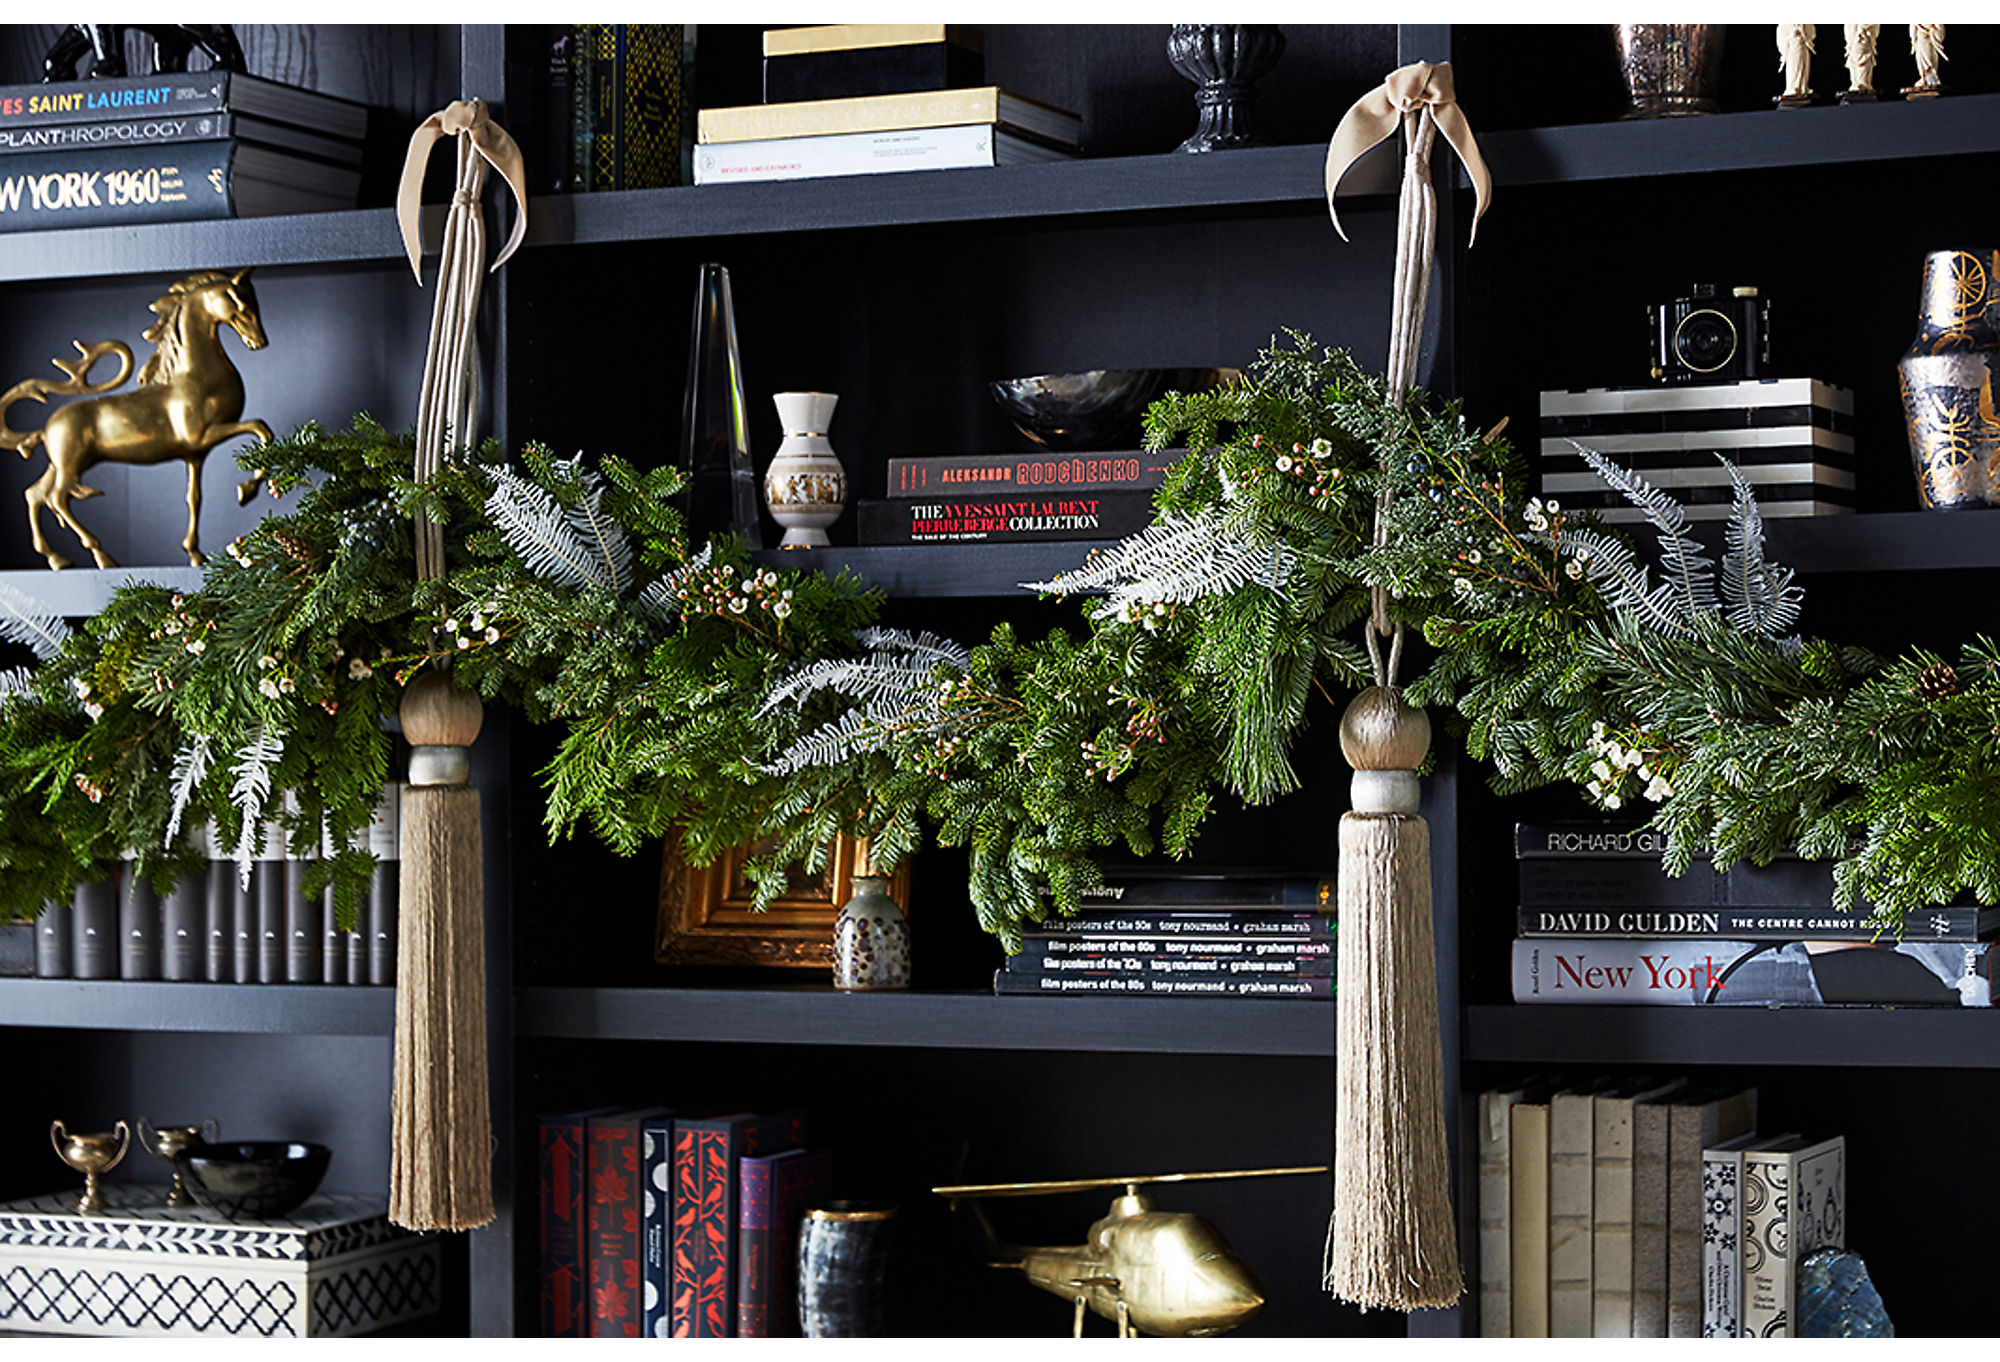 Here you can see how faux sprigs bring extra texture to a real garland. Adding in interesting faux elements to real pieces is a great way to customize your look. Photo by Manuel Rodriguez
